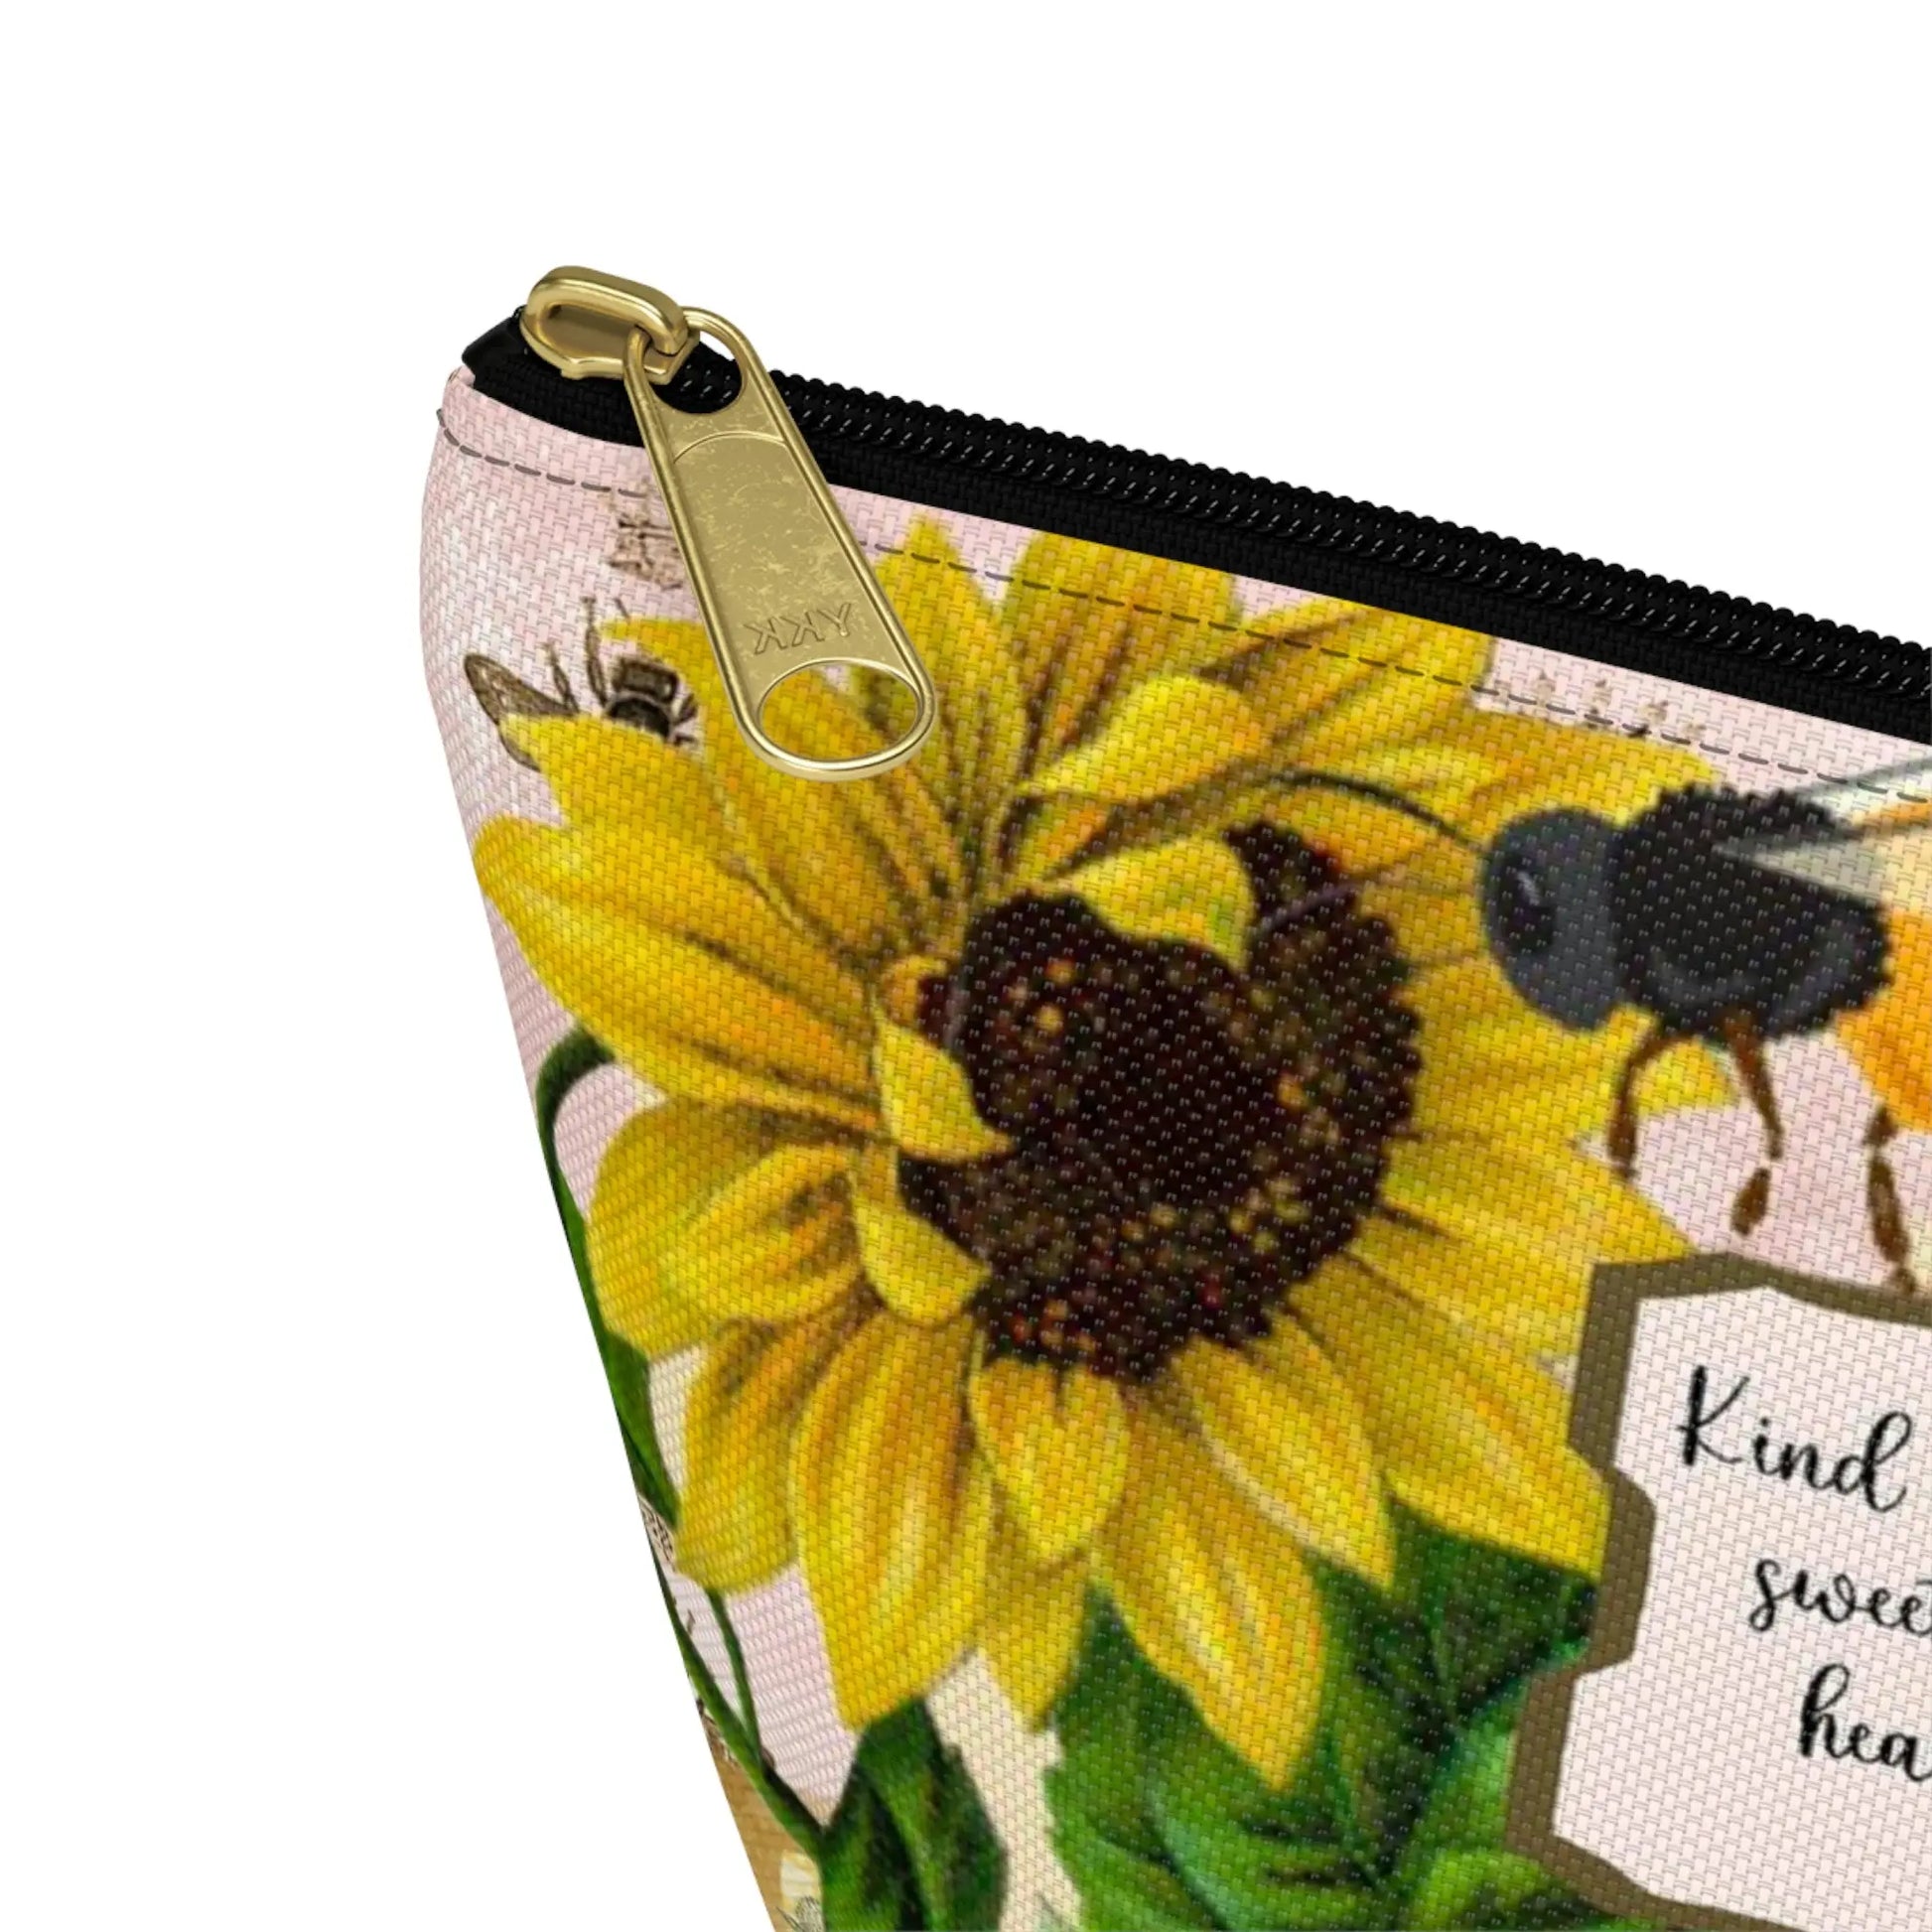 Kind Words are Like Honey Makeup Accessory Pouch w T-bottom - Vintage Honey Bee Printify